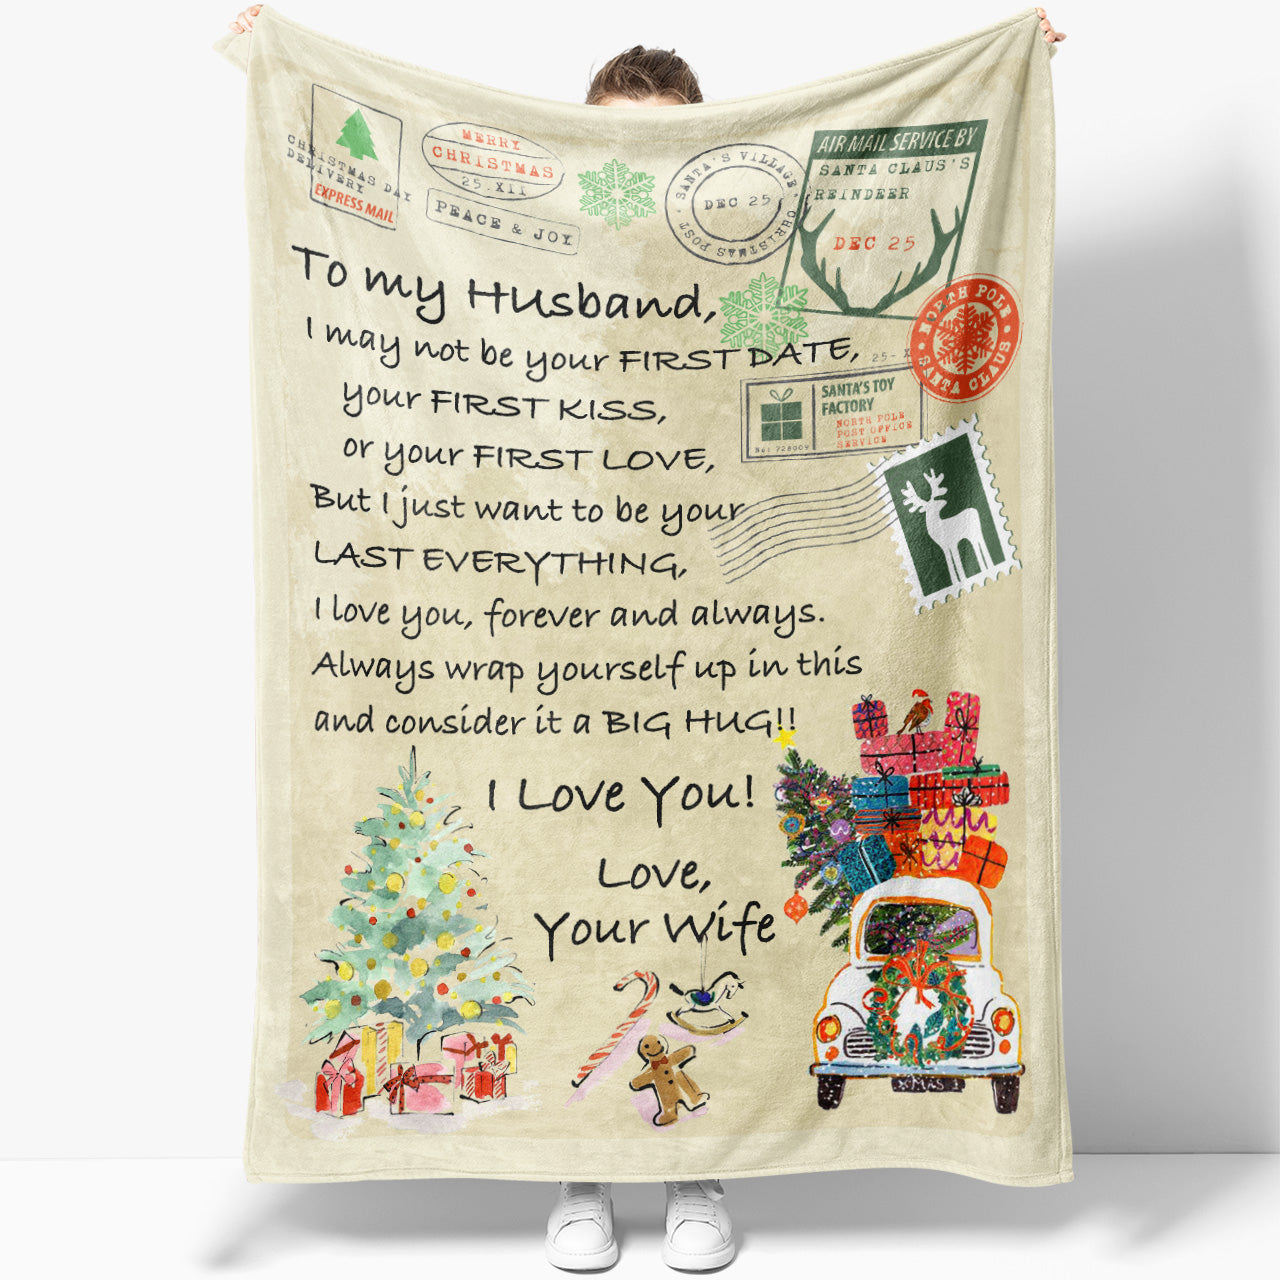 Blanket Gift For Husband, Christmas Gifts For Men, Not Be Your First Date